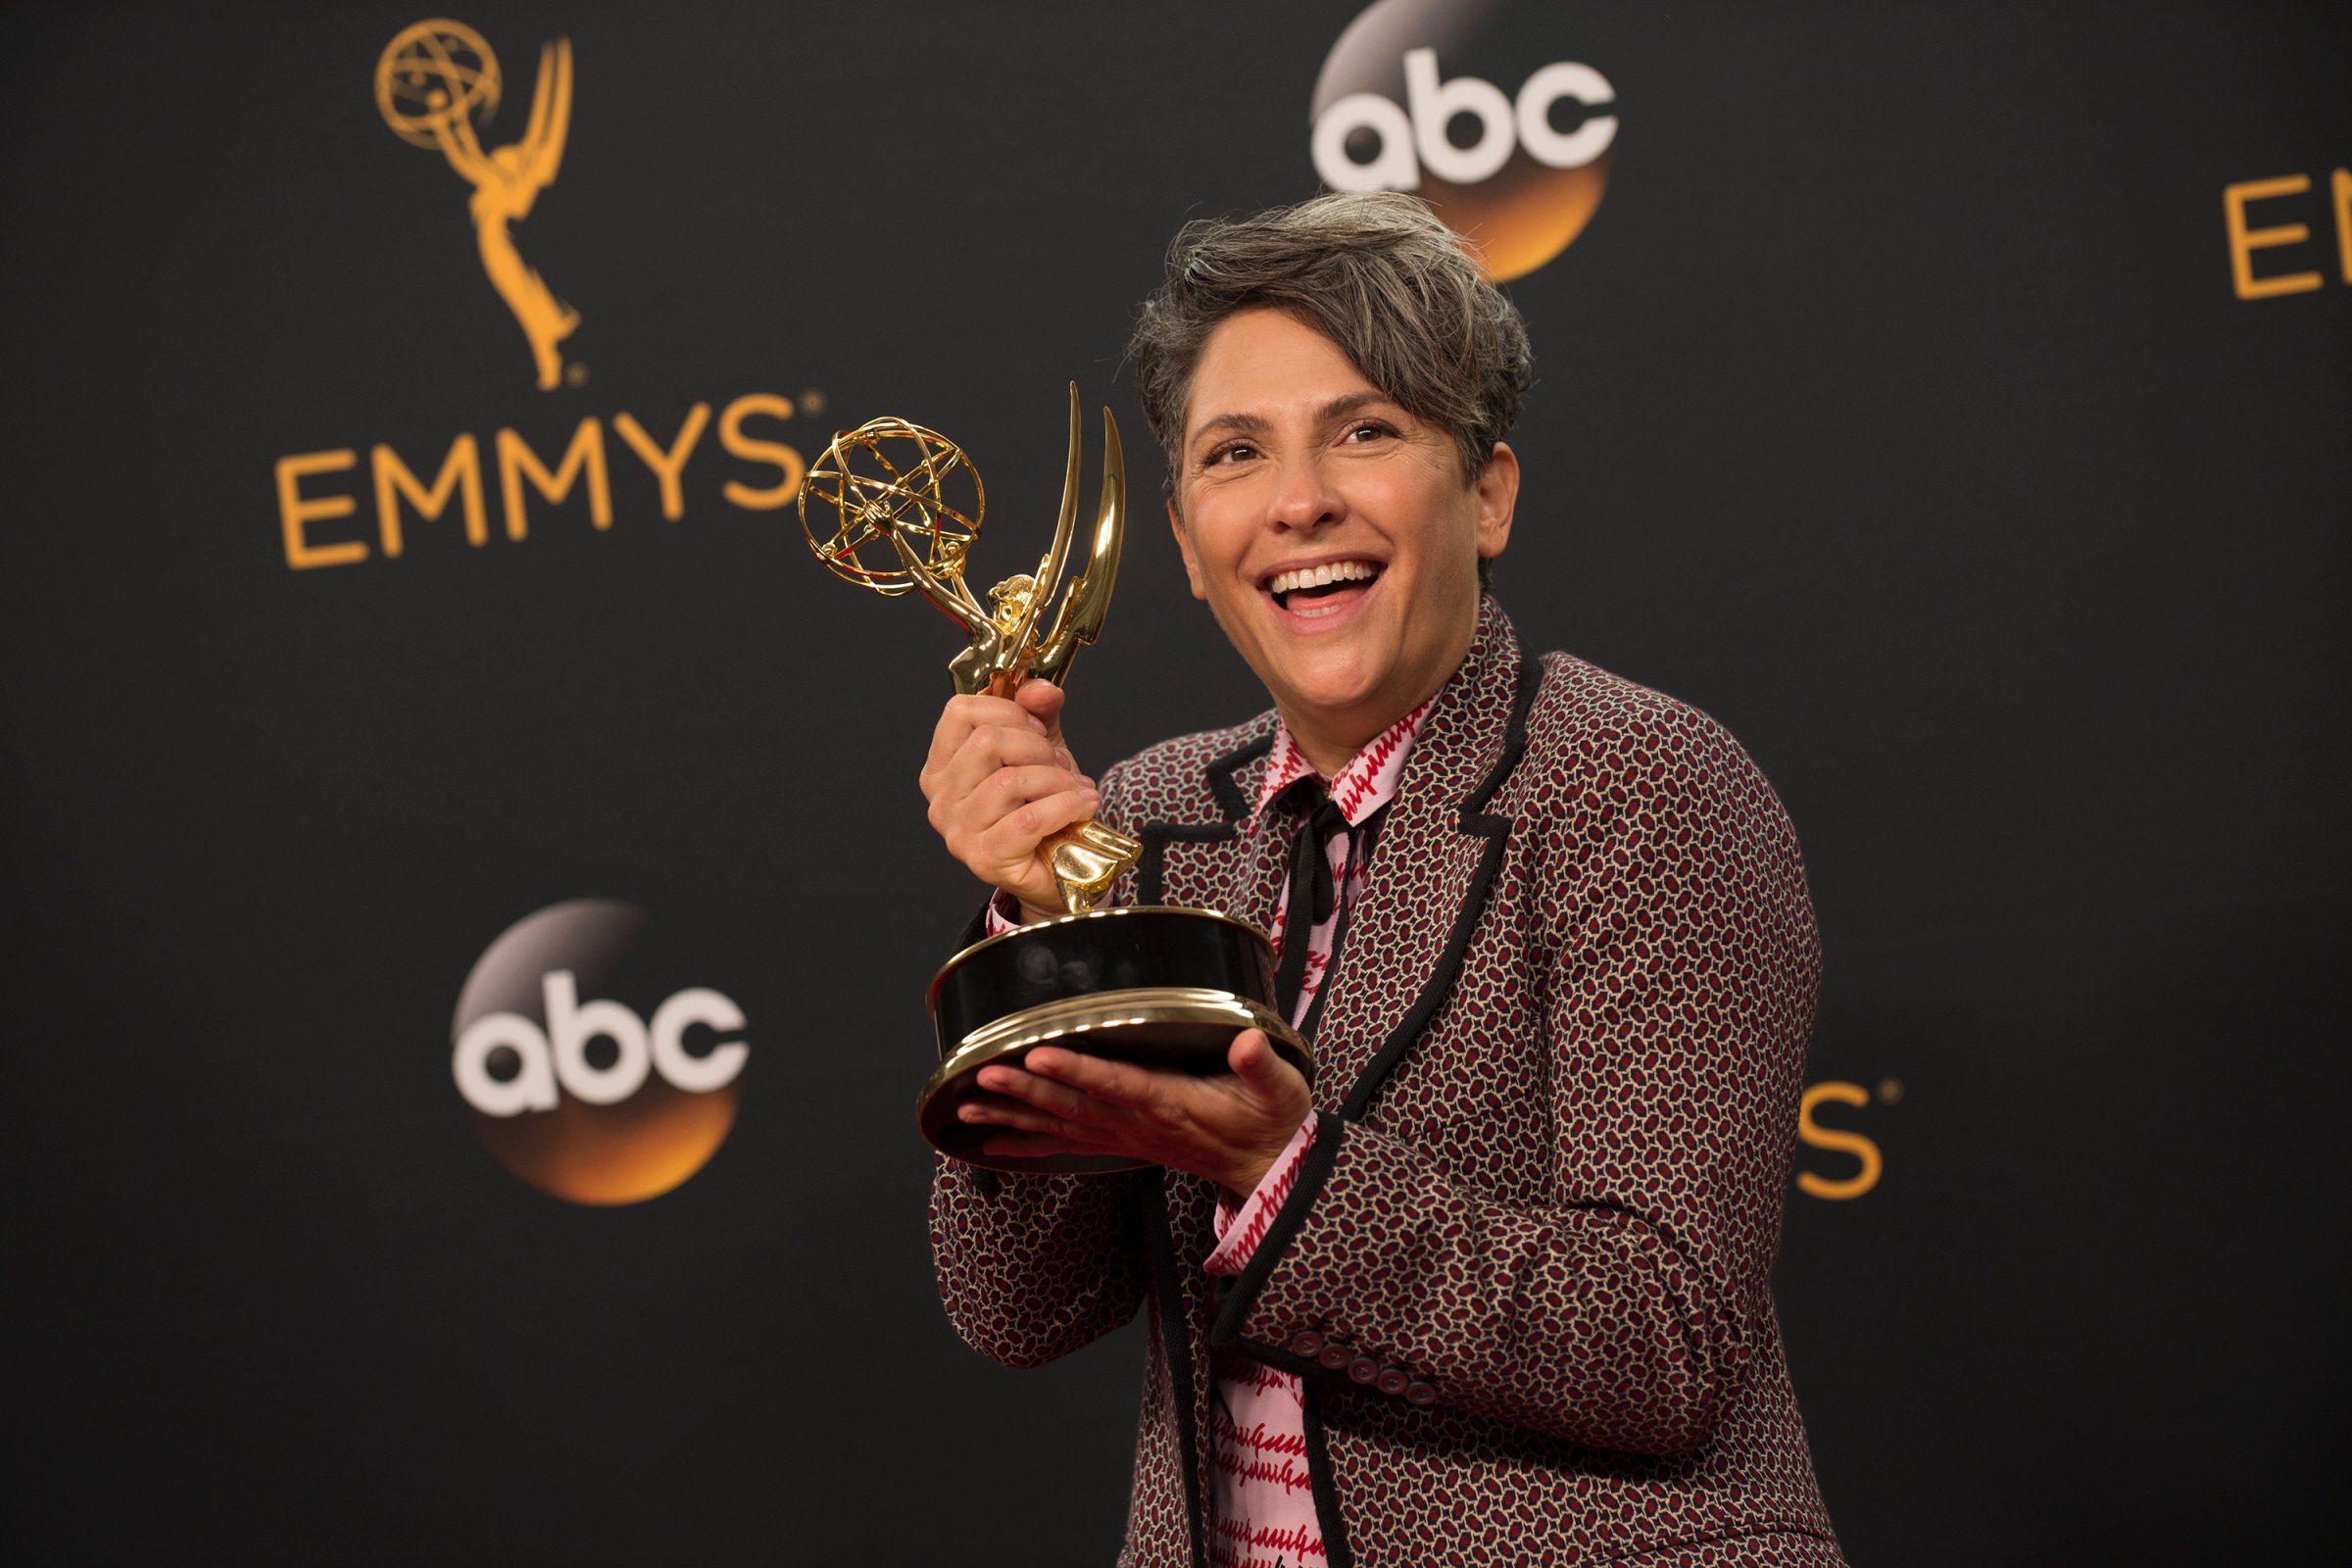 ABC's Coverage of The 68th Annual Emmy Awards